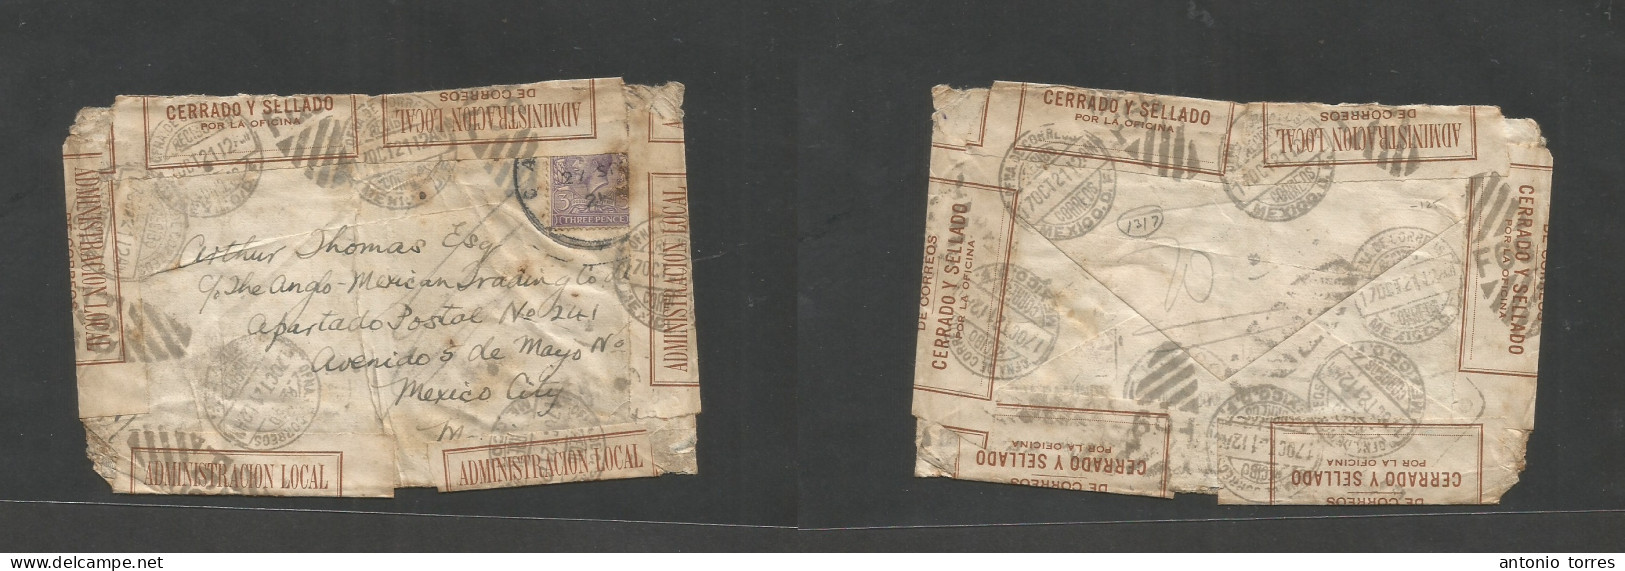 Mexico - Xx. 1921 (27 Sept) GB - DF (7 Oct) 3d Lilac Fkd Env. Arrived Opened At Edges And Sealed By Mexican Post Office - México